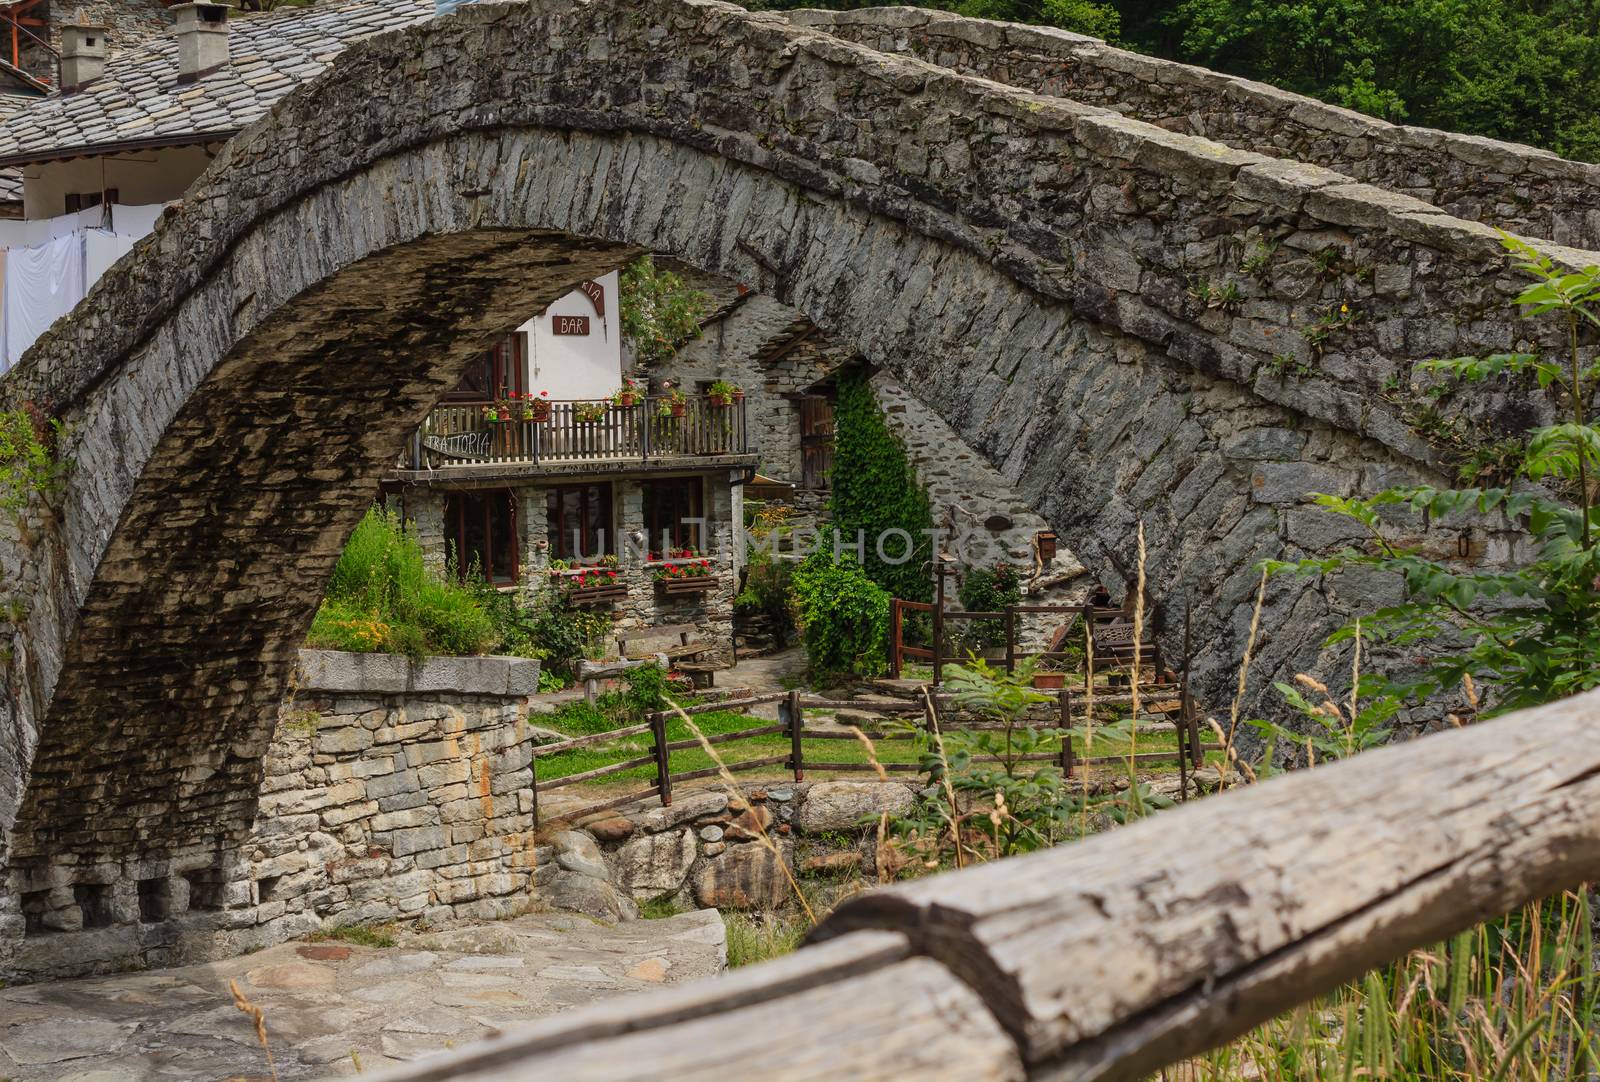 the bridge made of donkey back characteristic of an alpine village in Piedmont, Italy